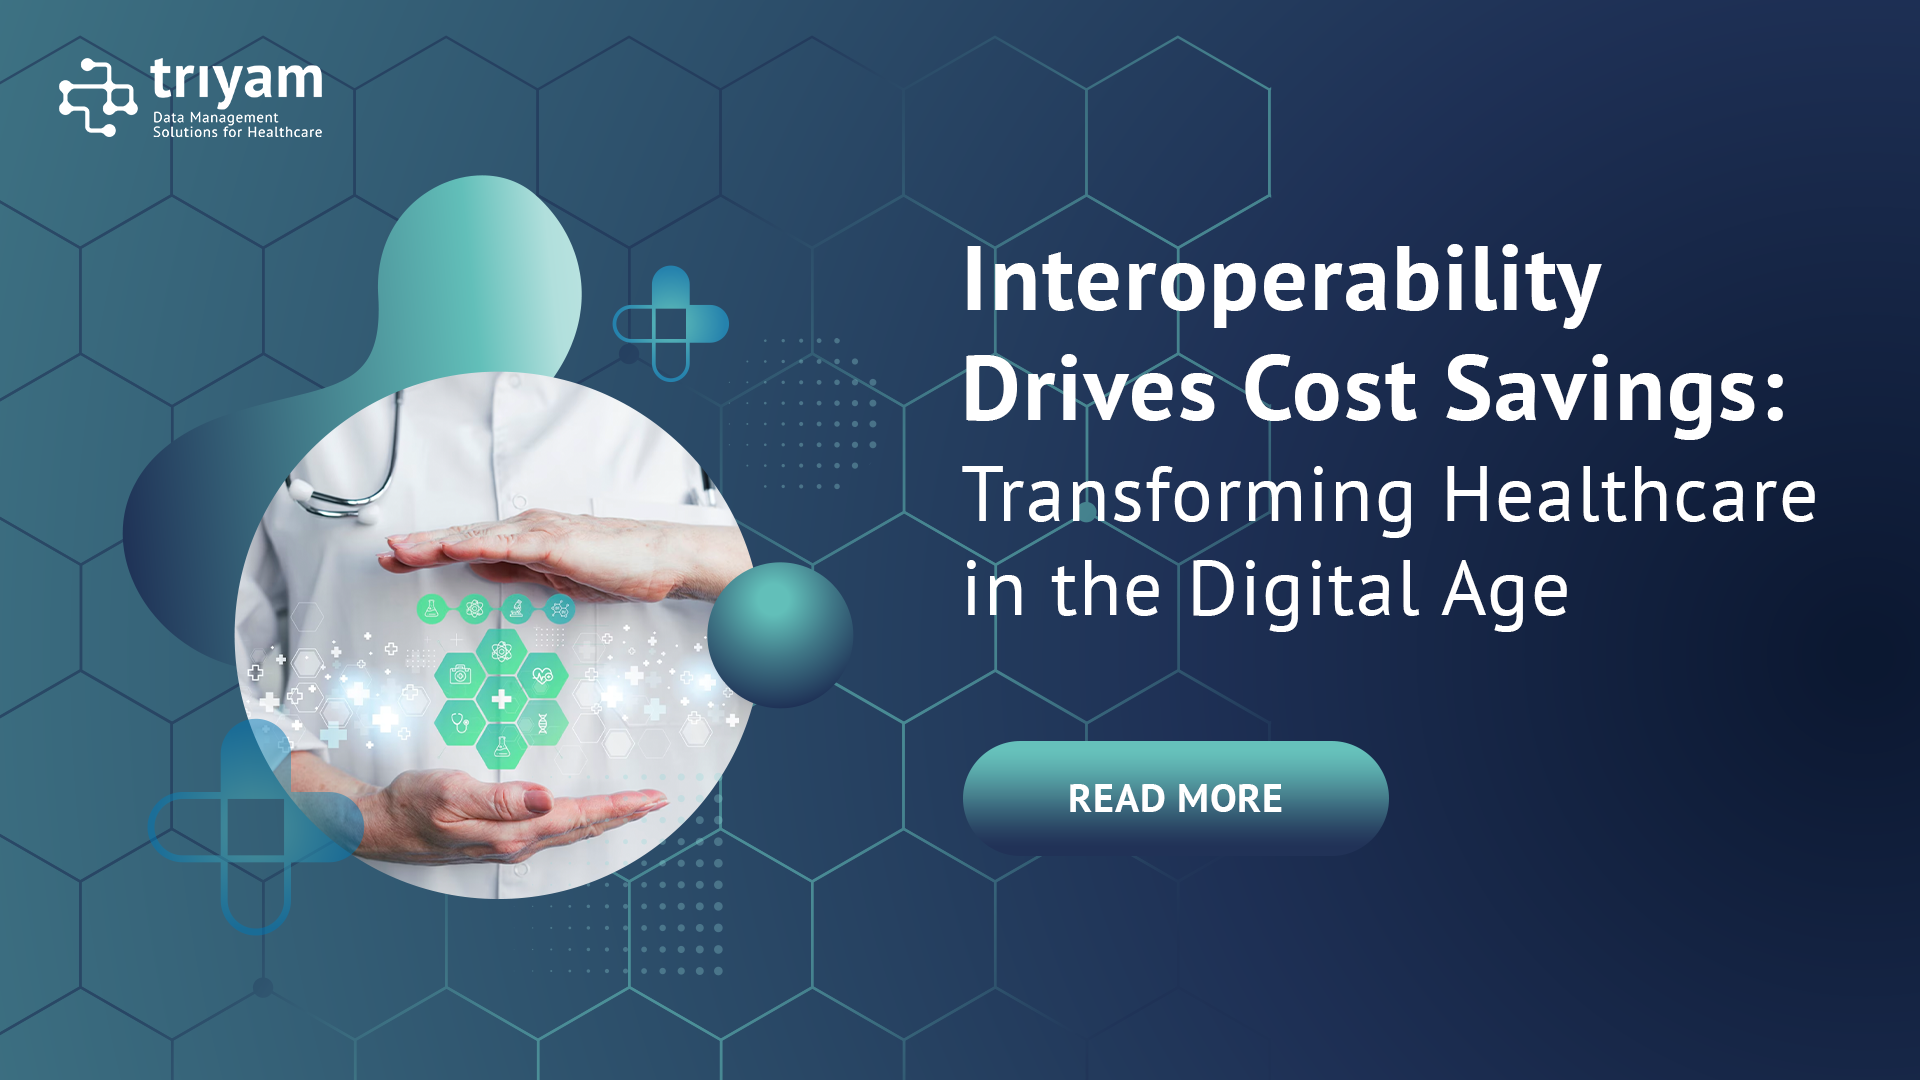 Interoperability Drives Cost Savings: Transforming Healthcare in the Digital Age